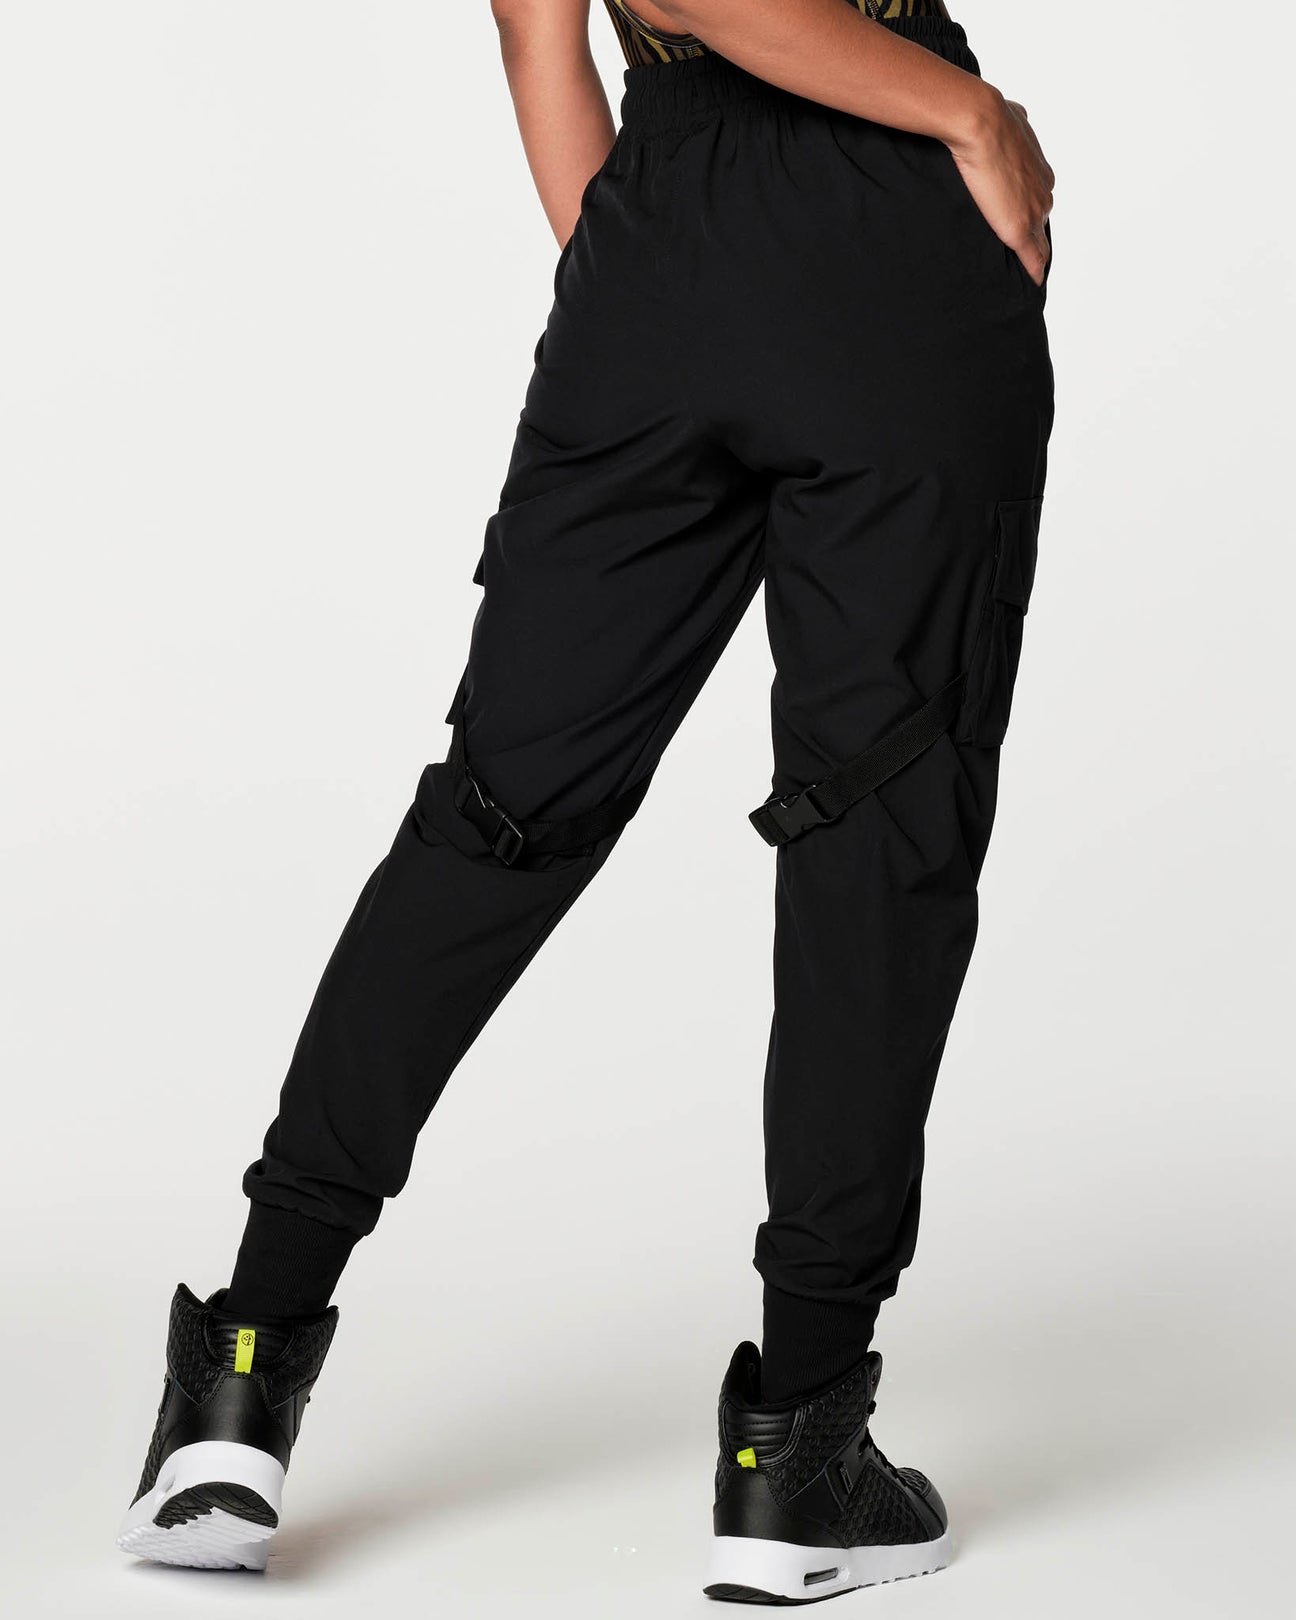 ZUMBA CARGO PANTS~Converts to Capri w Side Snaps~Feel the Music